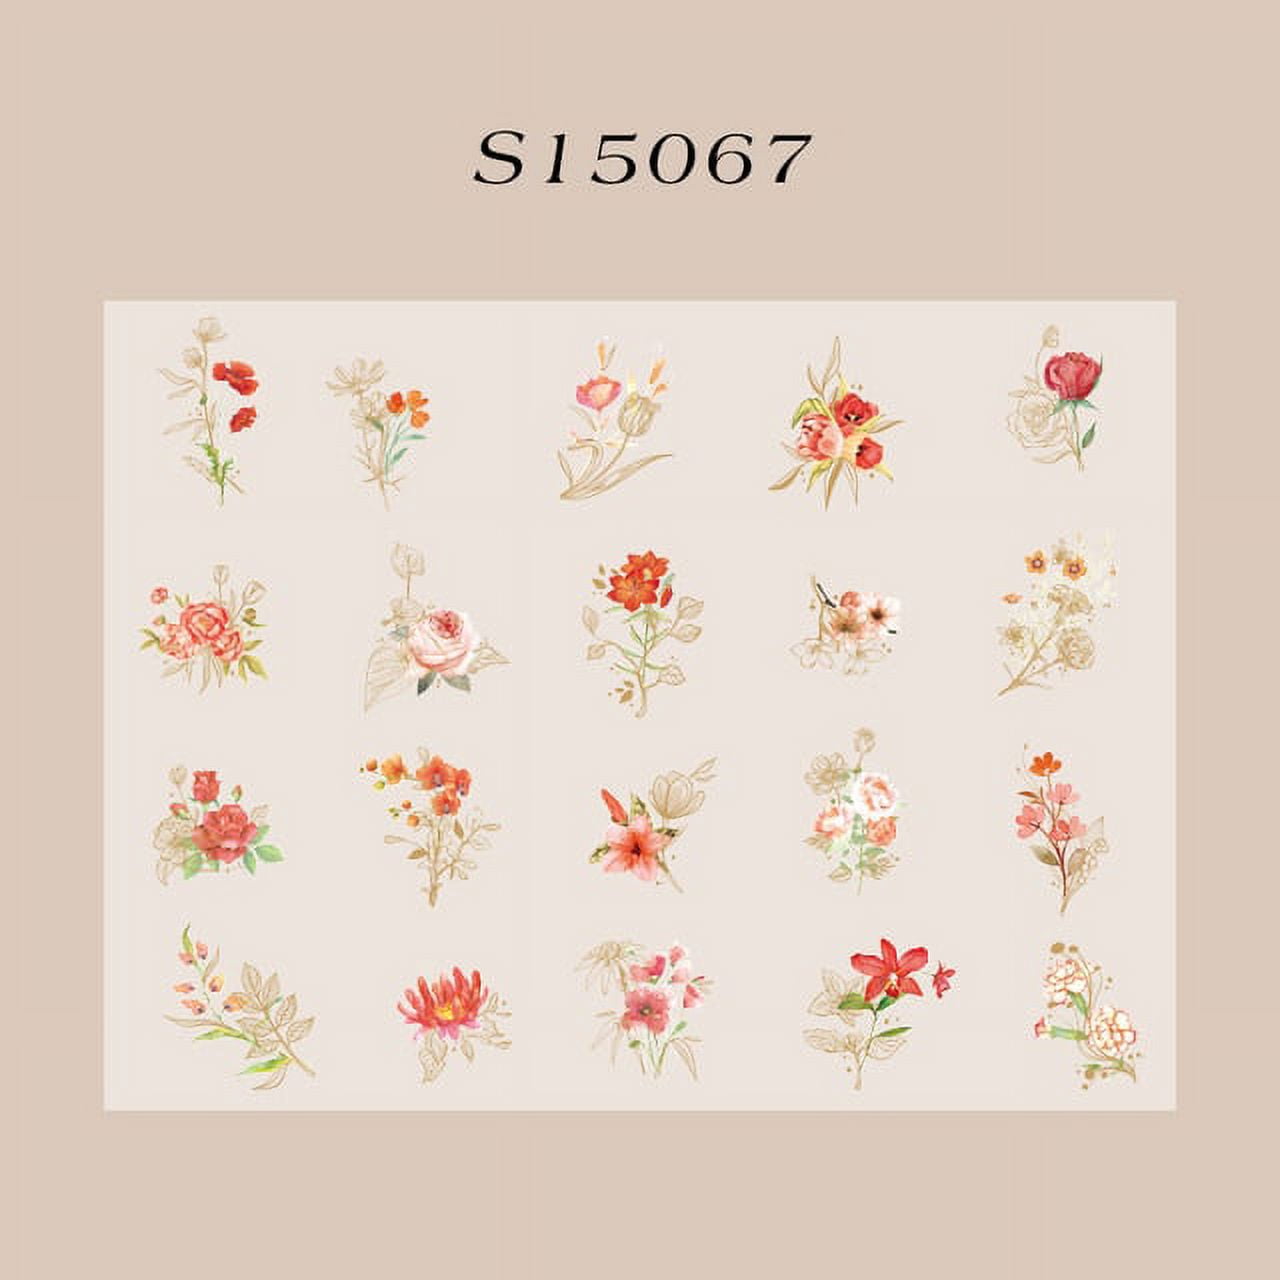 Mr.paper 6 Styles 100Pcs/Bag Vintage Botanical Stickers Aesthetic Flowers  Hand Account Material Decorative Stationery Sticker